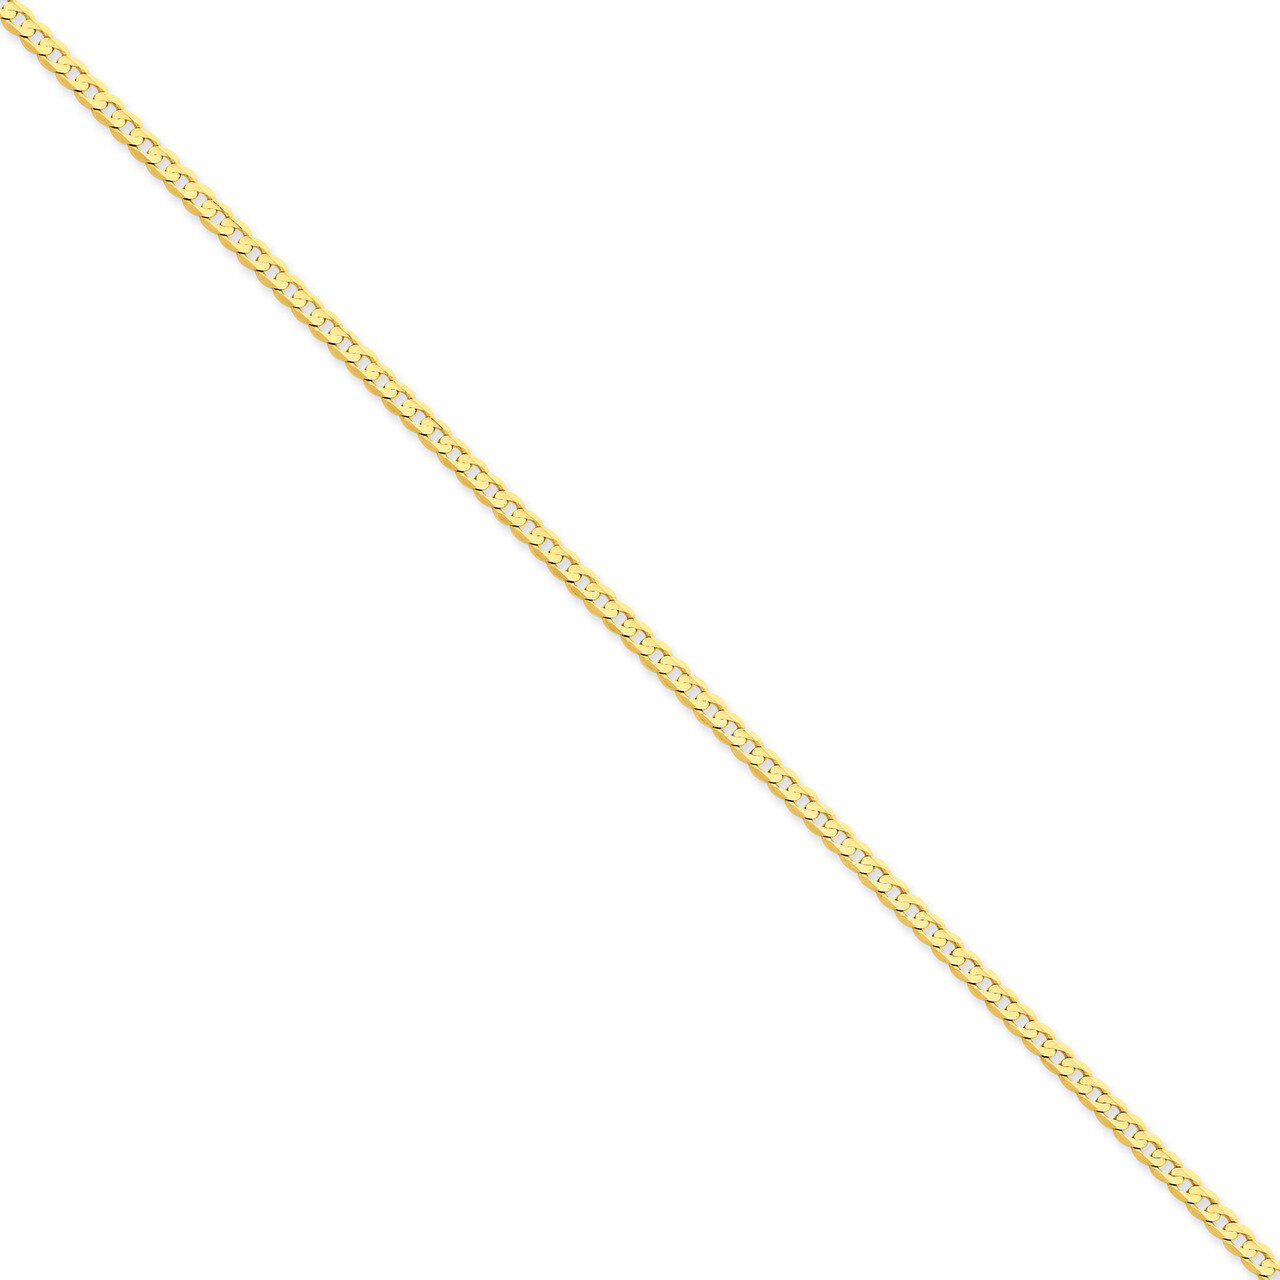 3mm Concave Curb (Lightweight) Chain 22 Inch 14k Gold LCR080-22